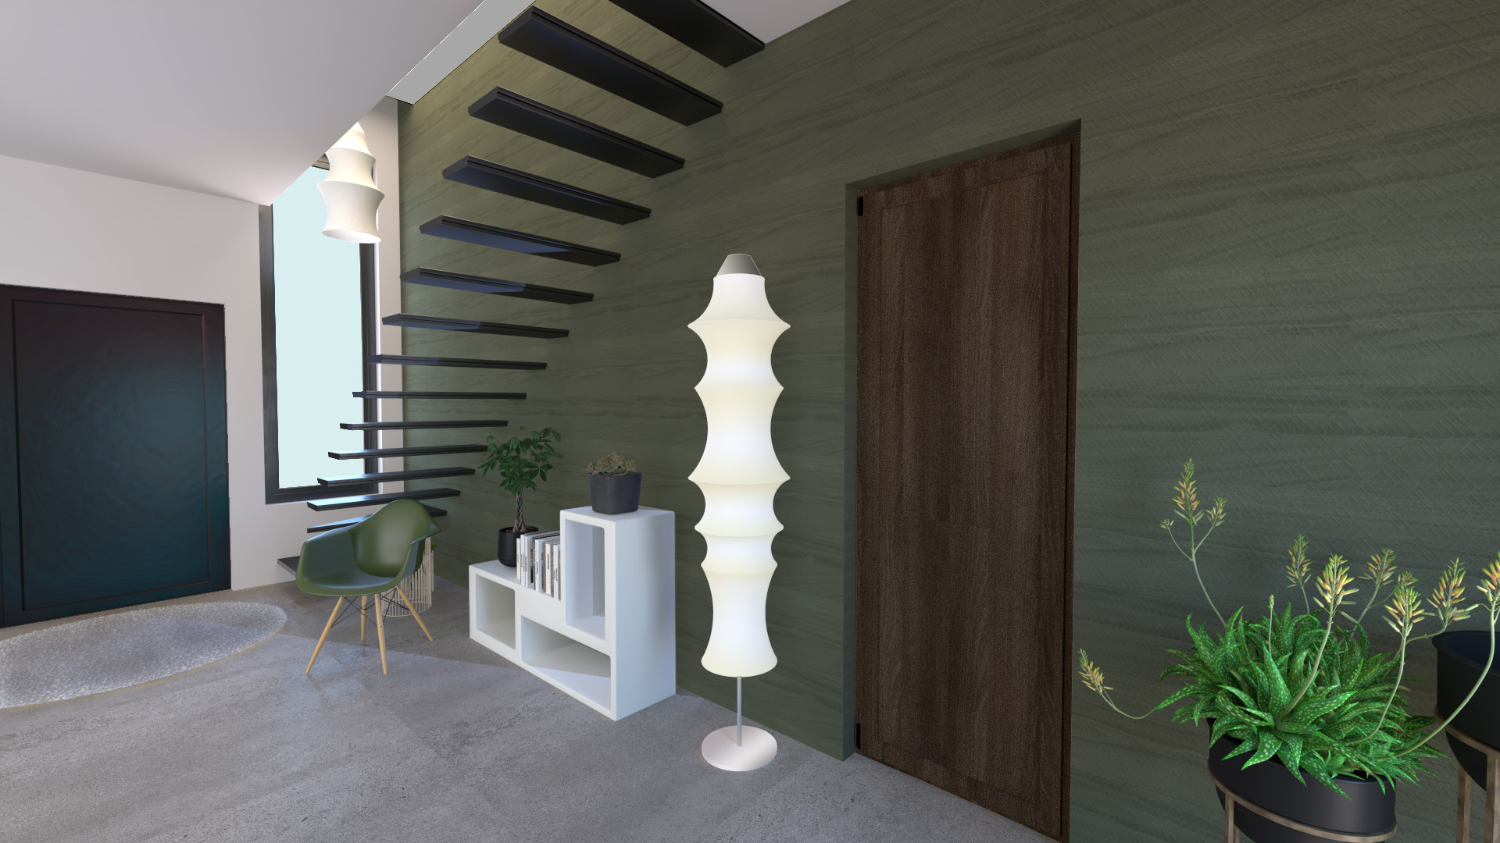 Photorealistic rendering of the wood cladding on the staircase wall; project by Elles Interior Design.